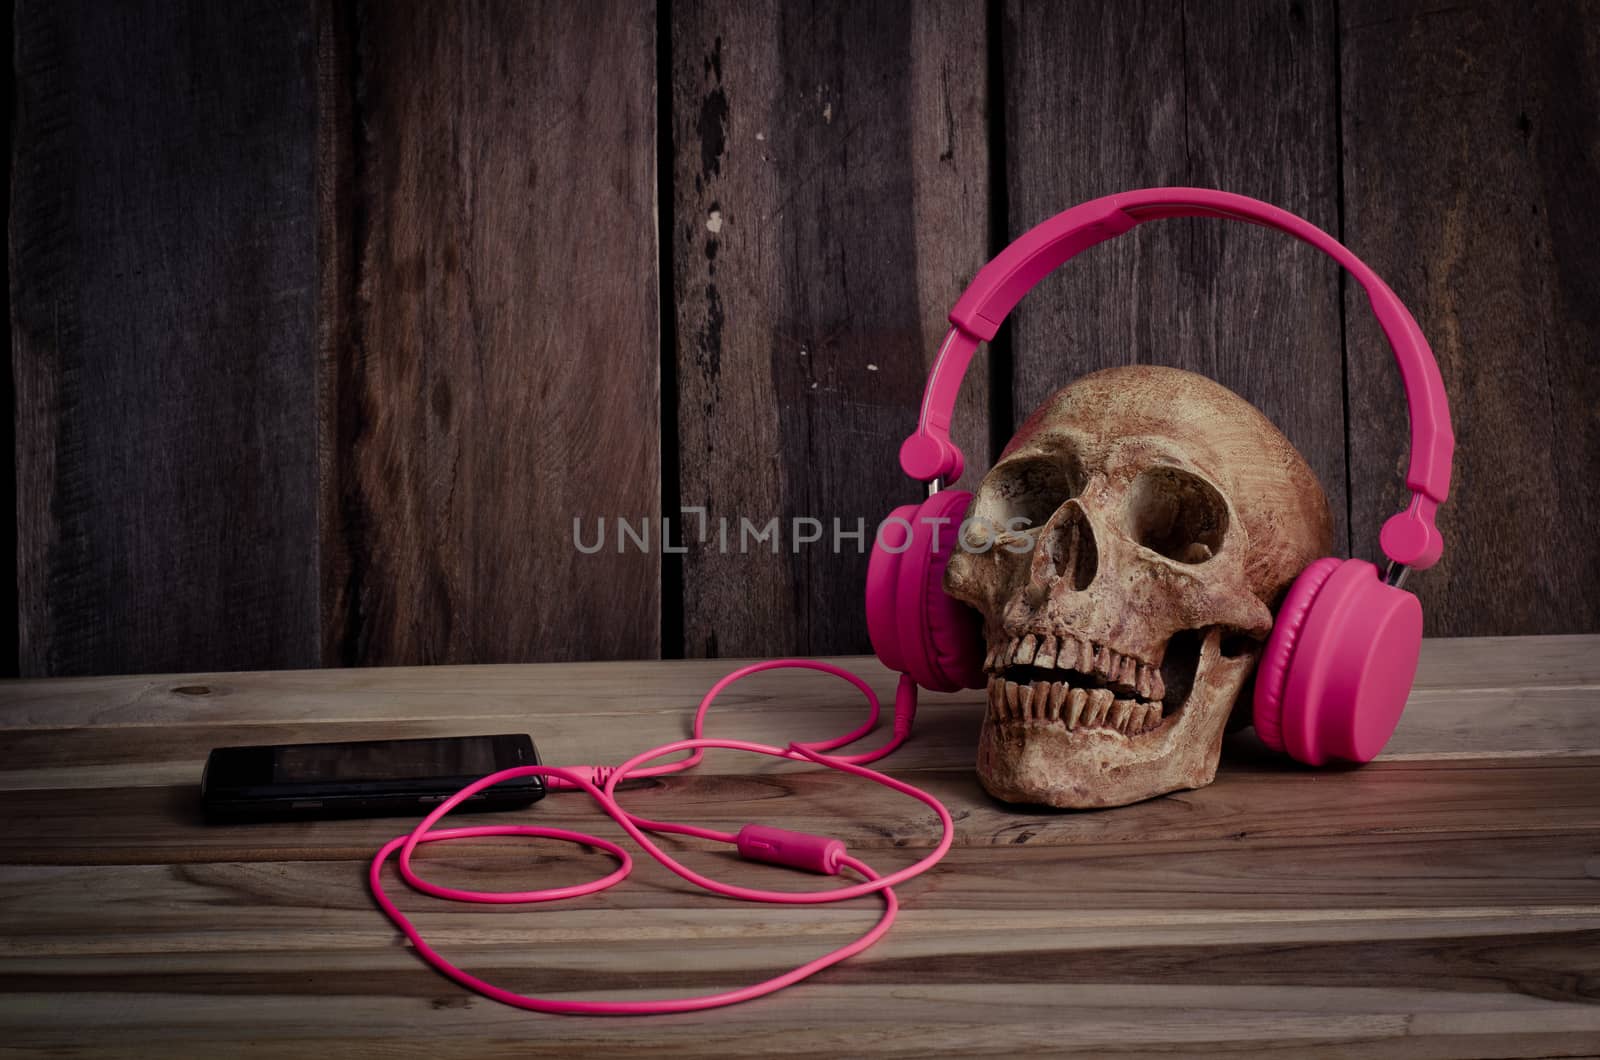 Still life human skull model with pink headphones on wooden background